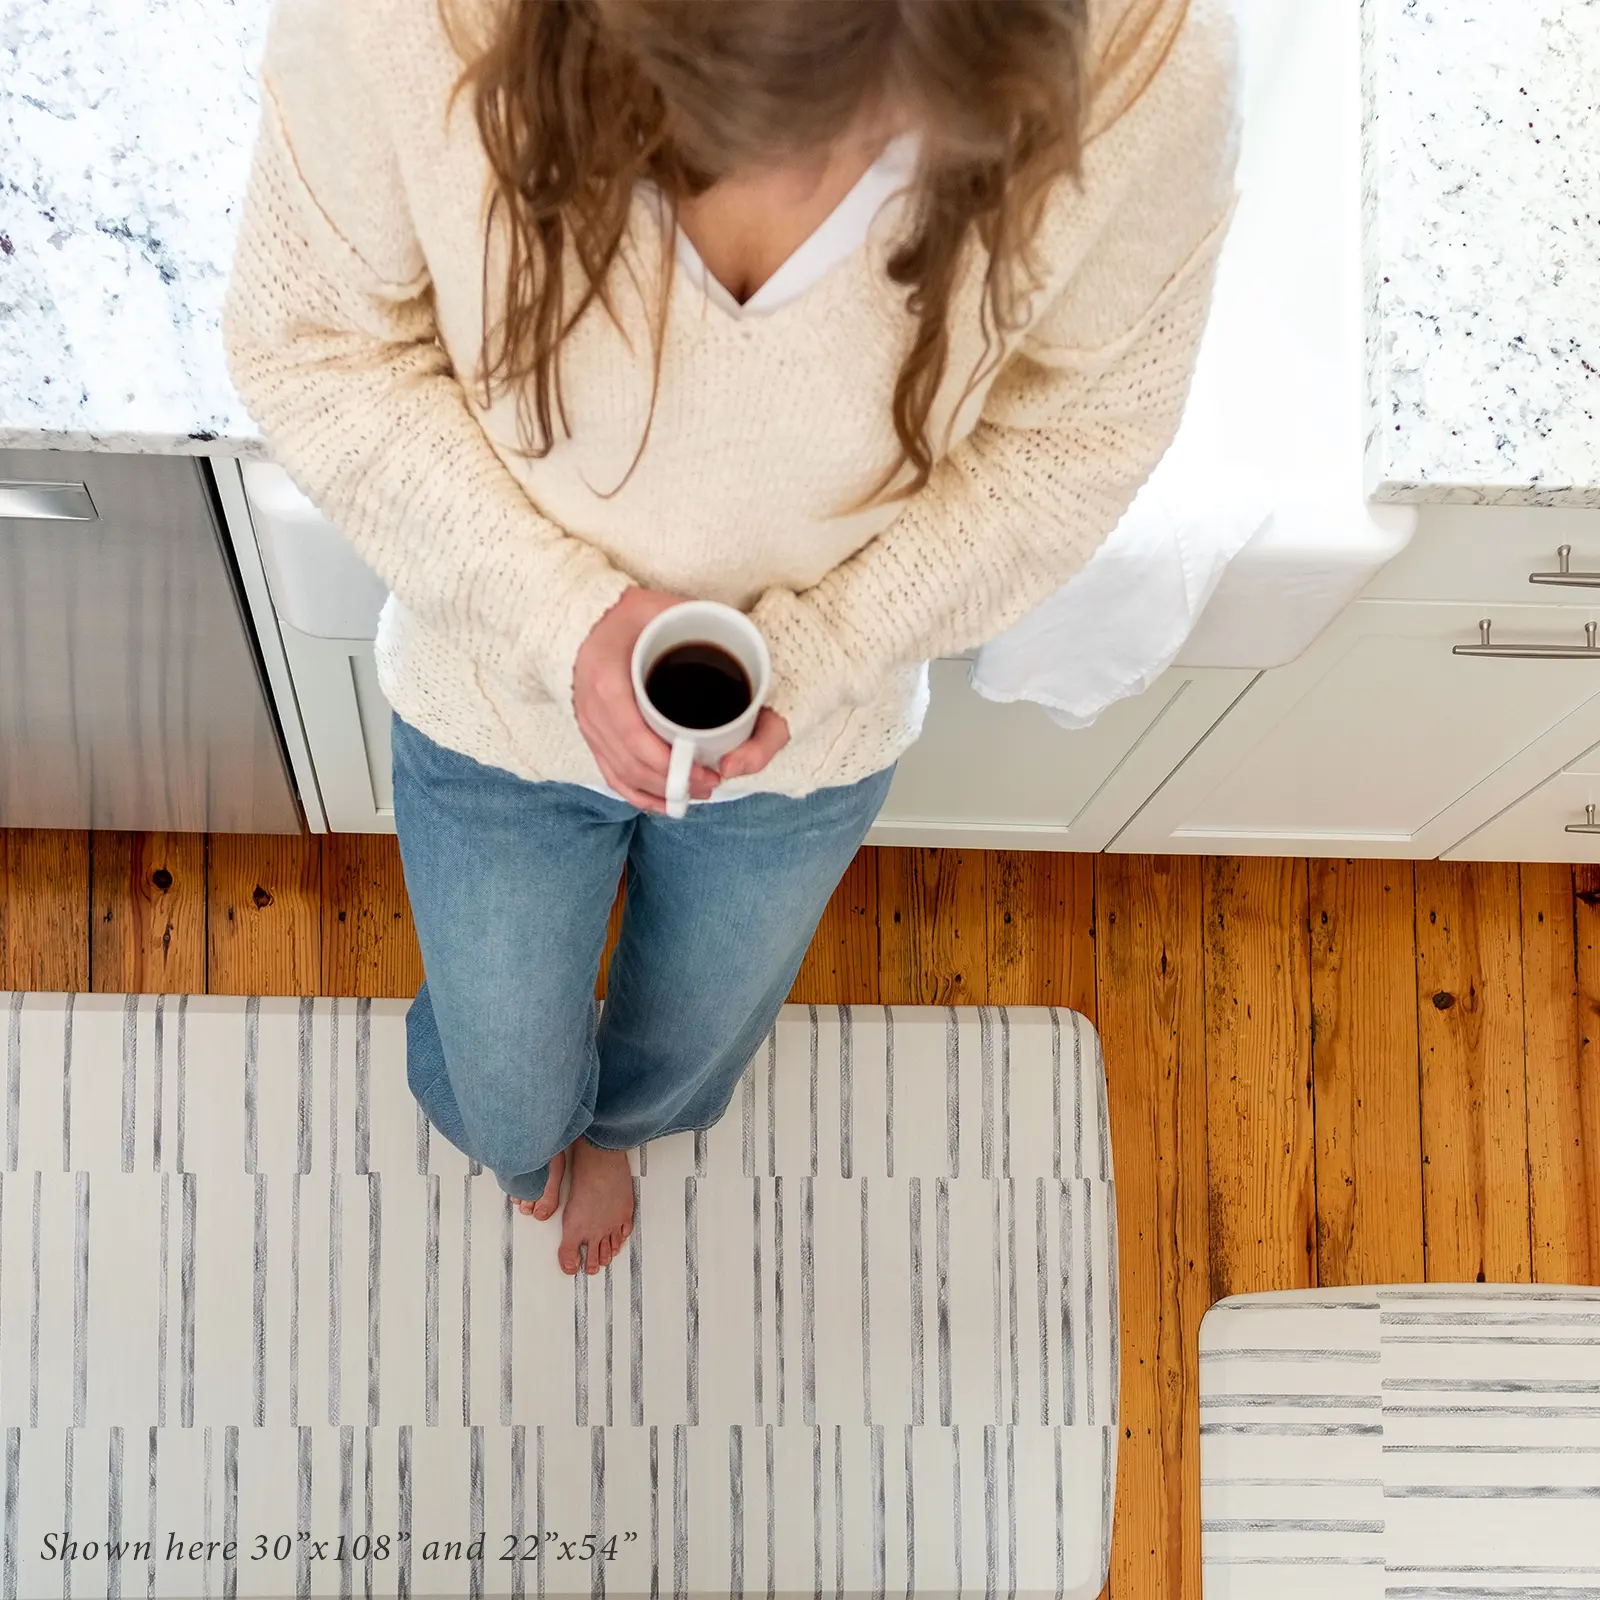 Gray and white inverted stripe kitchen mat shown from above in kitchen with woman drinking a cup of coffee standing on size 30x108